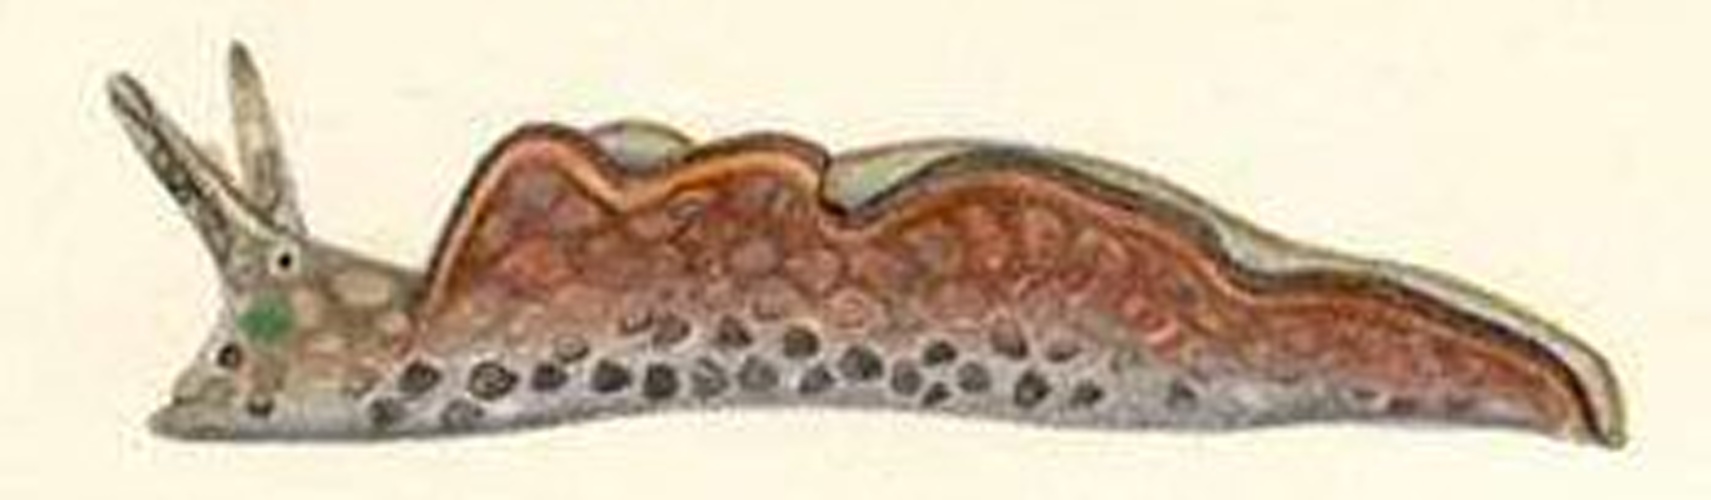 Elysia rufescens © On the Sea Slug Forum page it states that this colour drawing was used by William Harper Pease, who died in 1871, in his description of this species of sea slug.